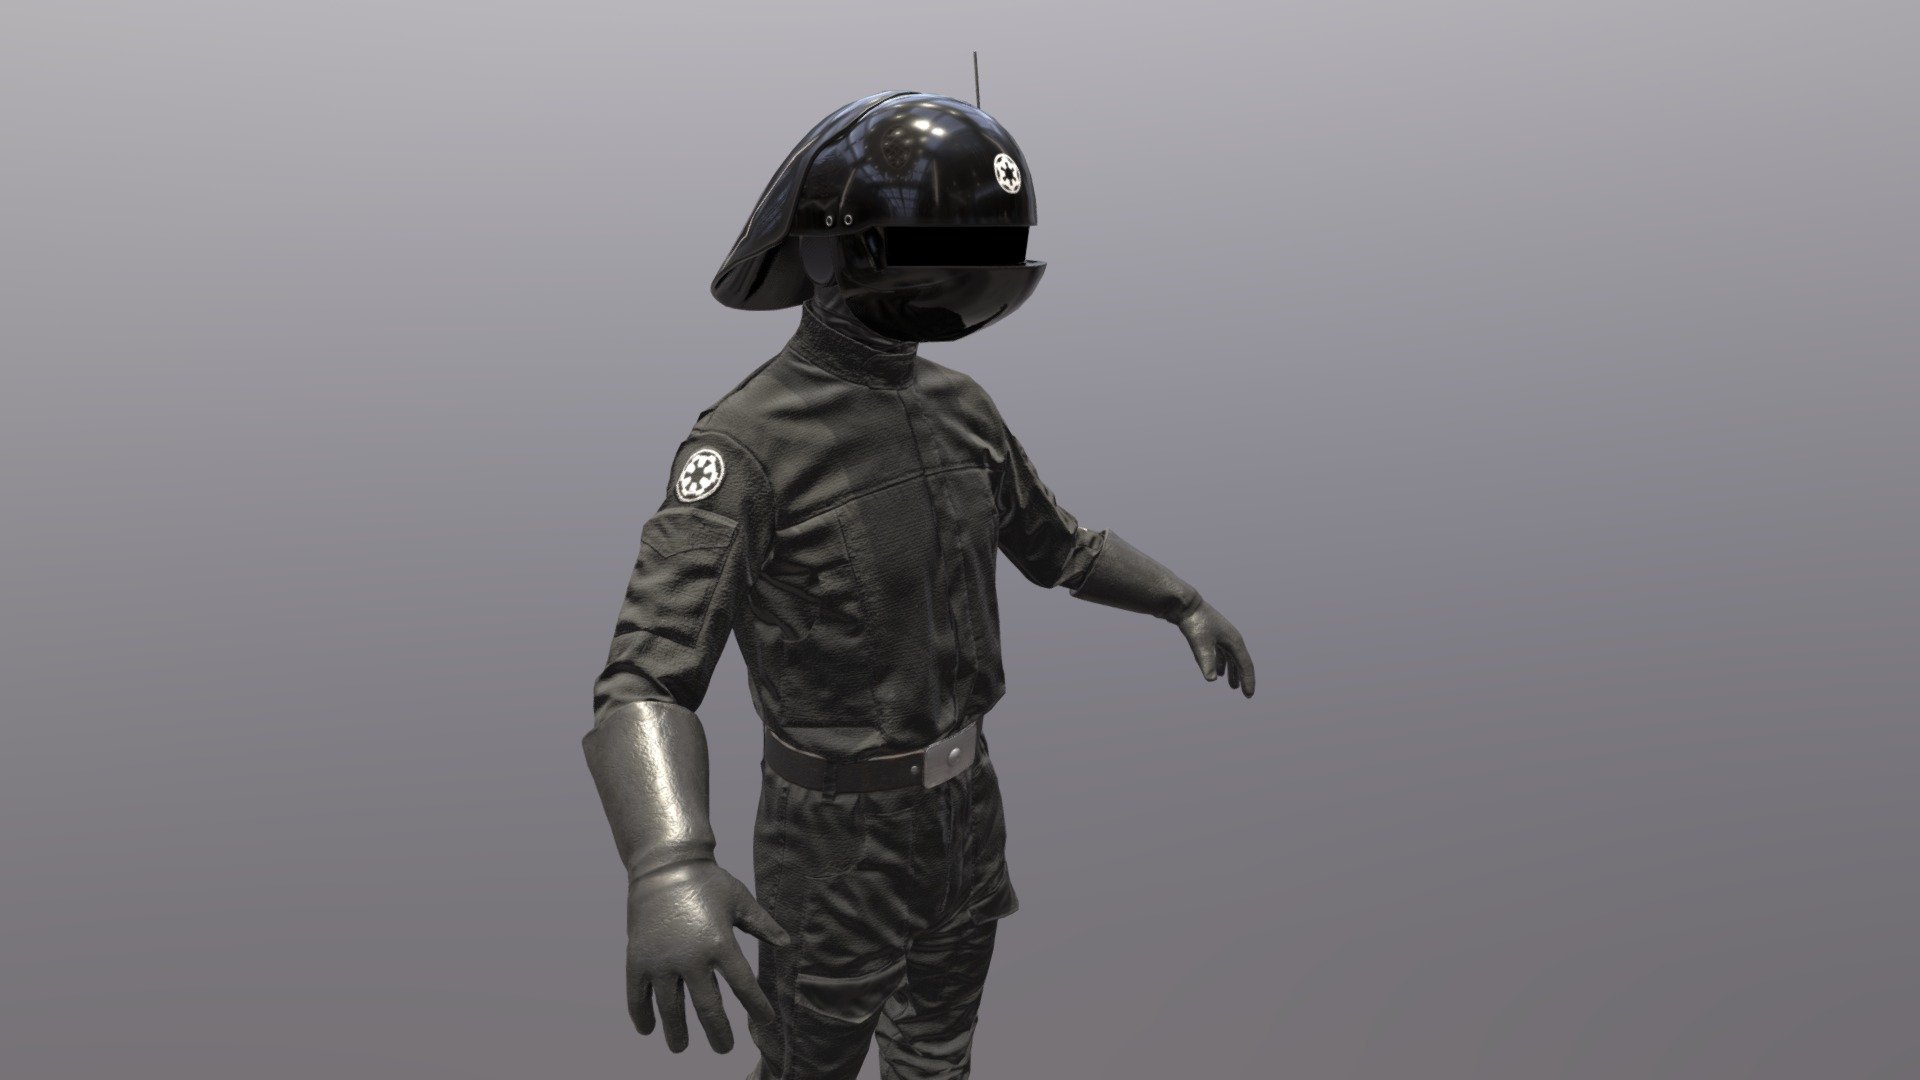 The Death Star Gunner from Rotj made for a Battlefront 2 mod - Imperial Gunner (Return of the Jedi) - 3D model by This_Guy446 (@pai0003) 3d model